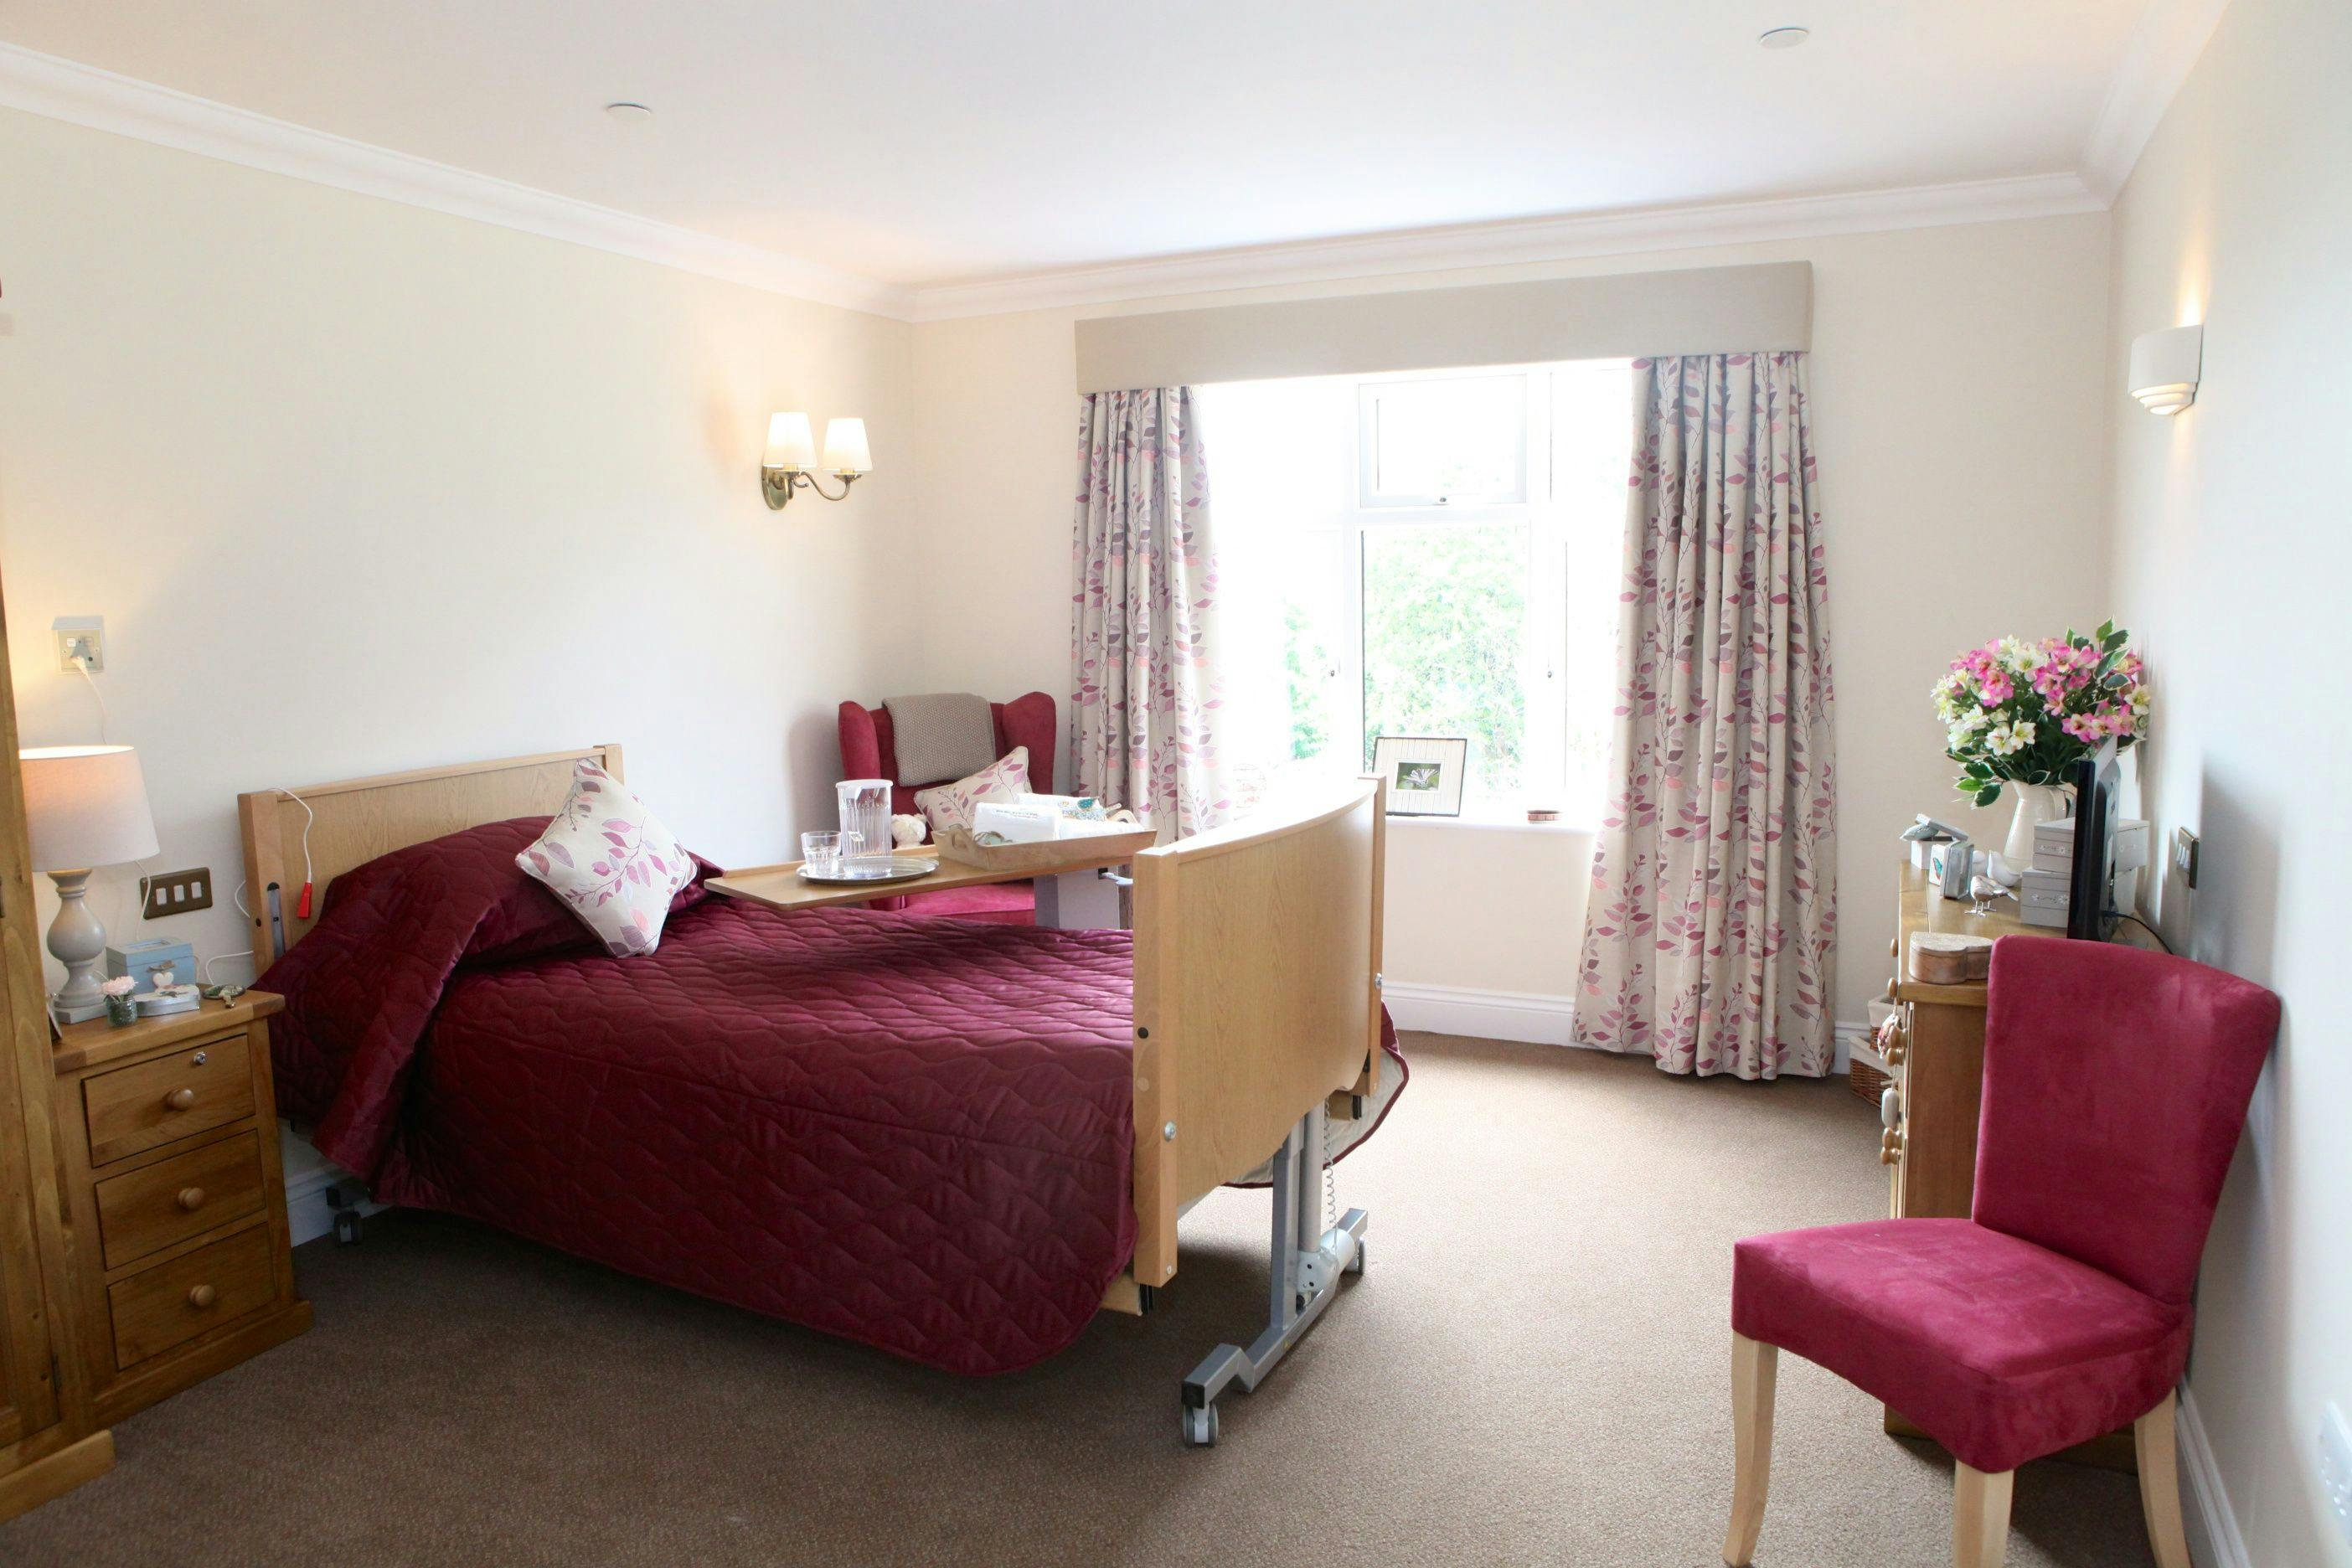 Bedroom of Bryn Ivor Lodge care home in Newport, Cardiff